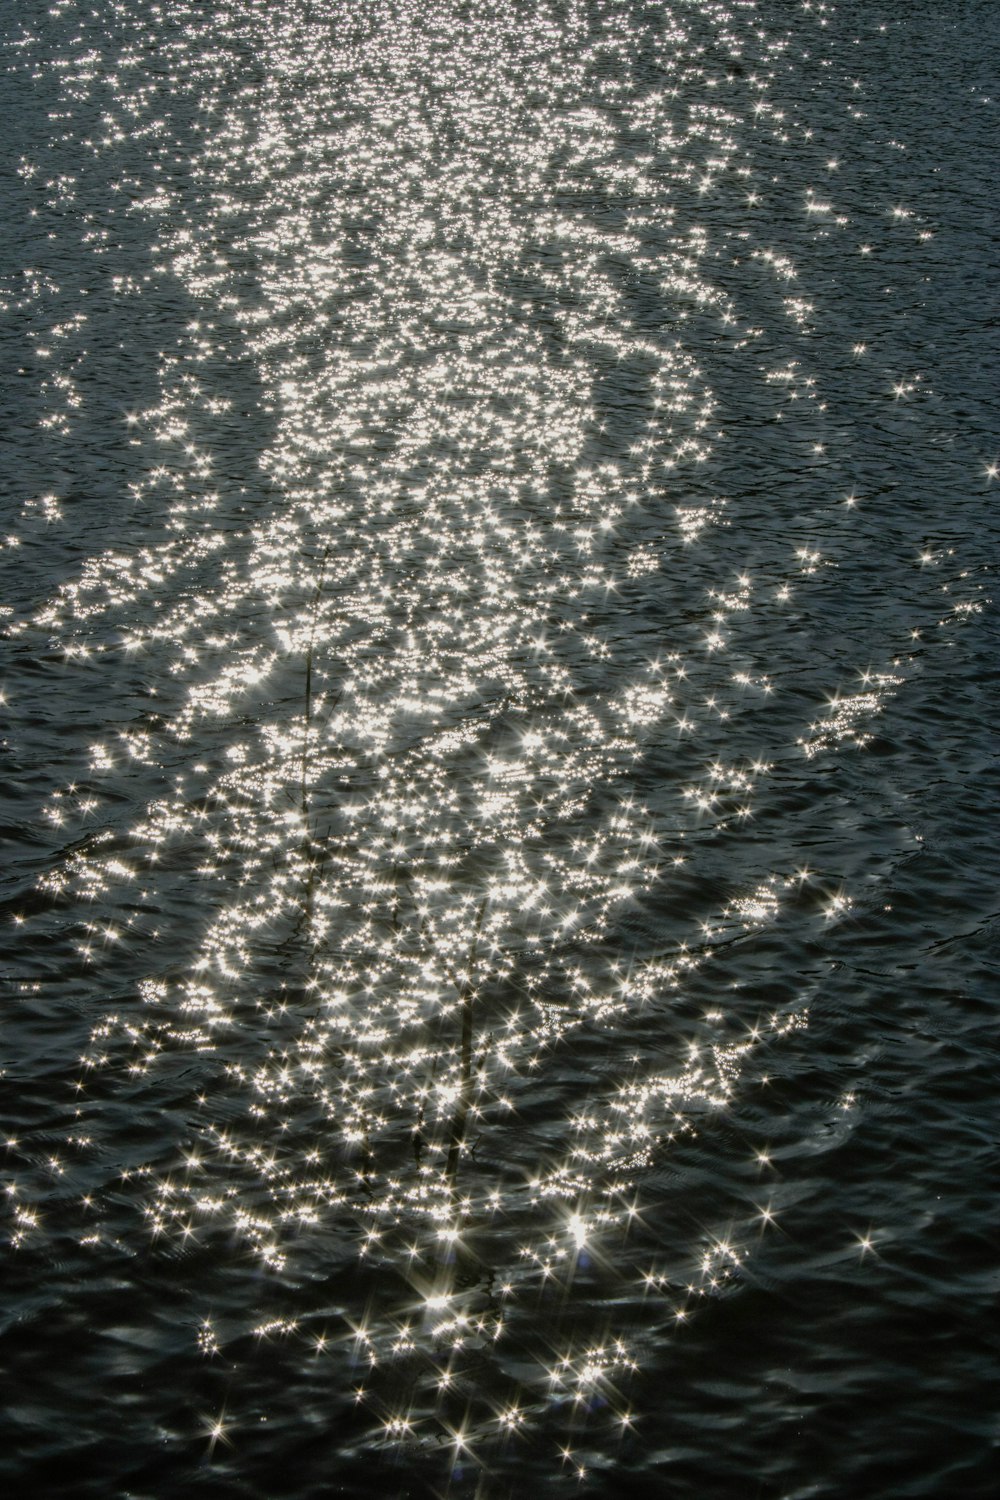 the sun shines on the water as it reflects off the surface